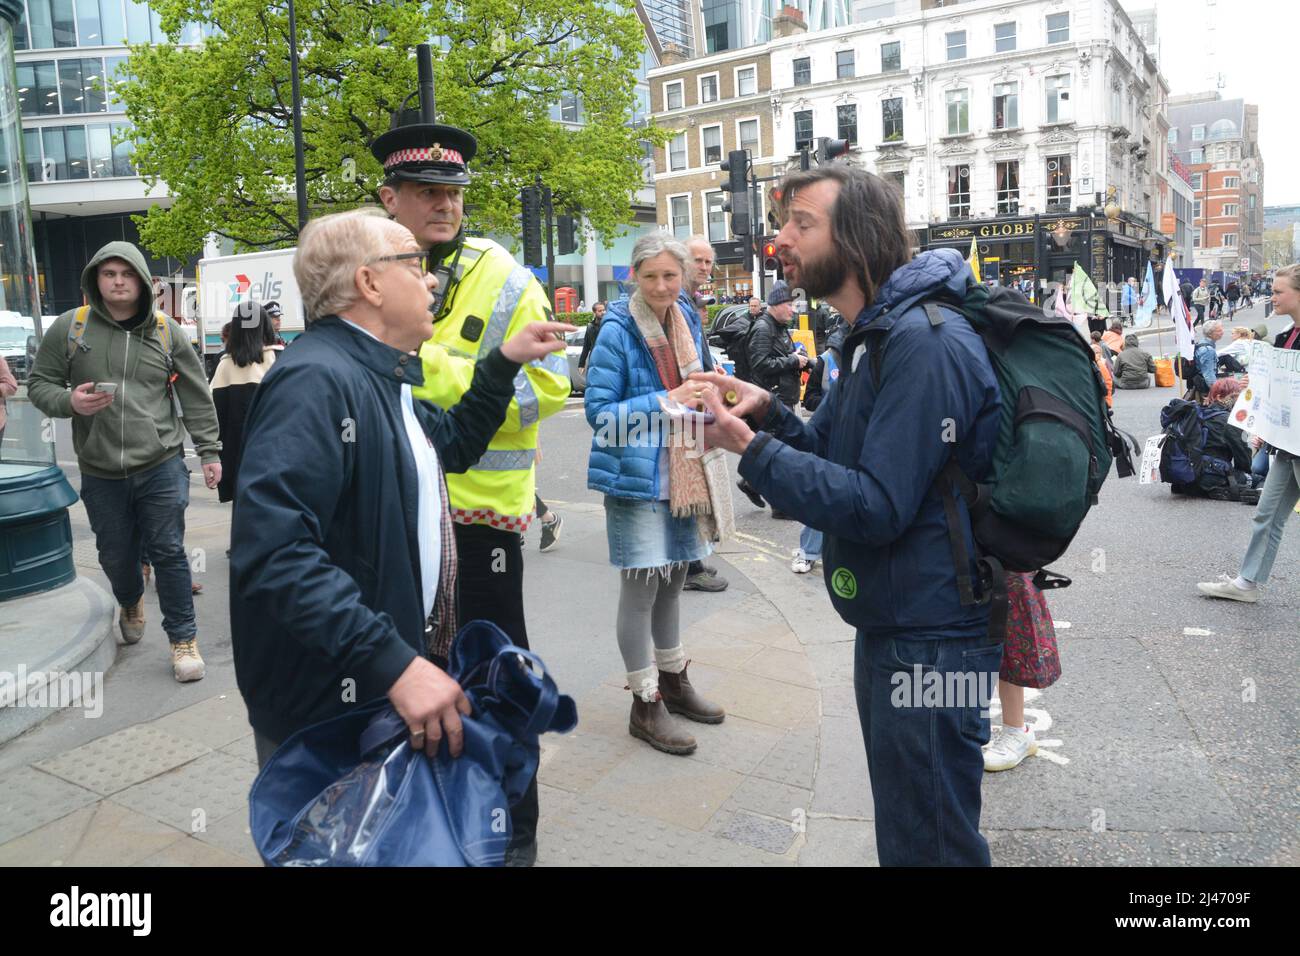 the climate activists xr  group took to the black rock hq following through to block london city roads one angered worker confronts the road block Stock Photo